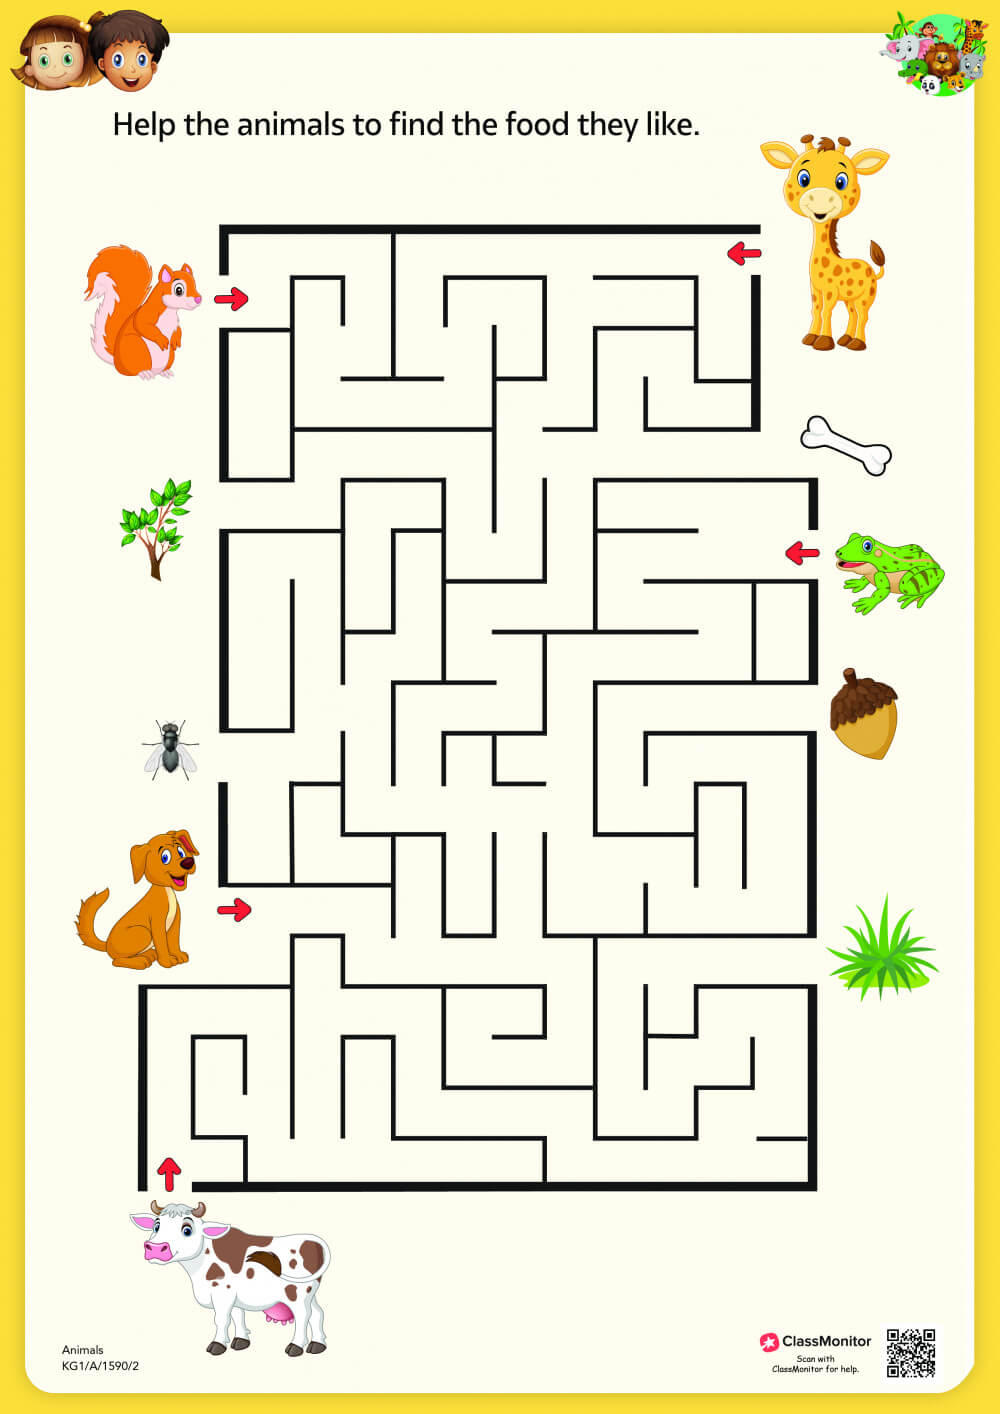 Animals, Birds & Insects Activity Animals & Their Food - Maze - ClassMonitor